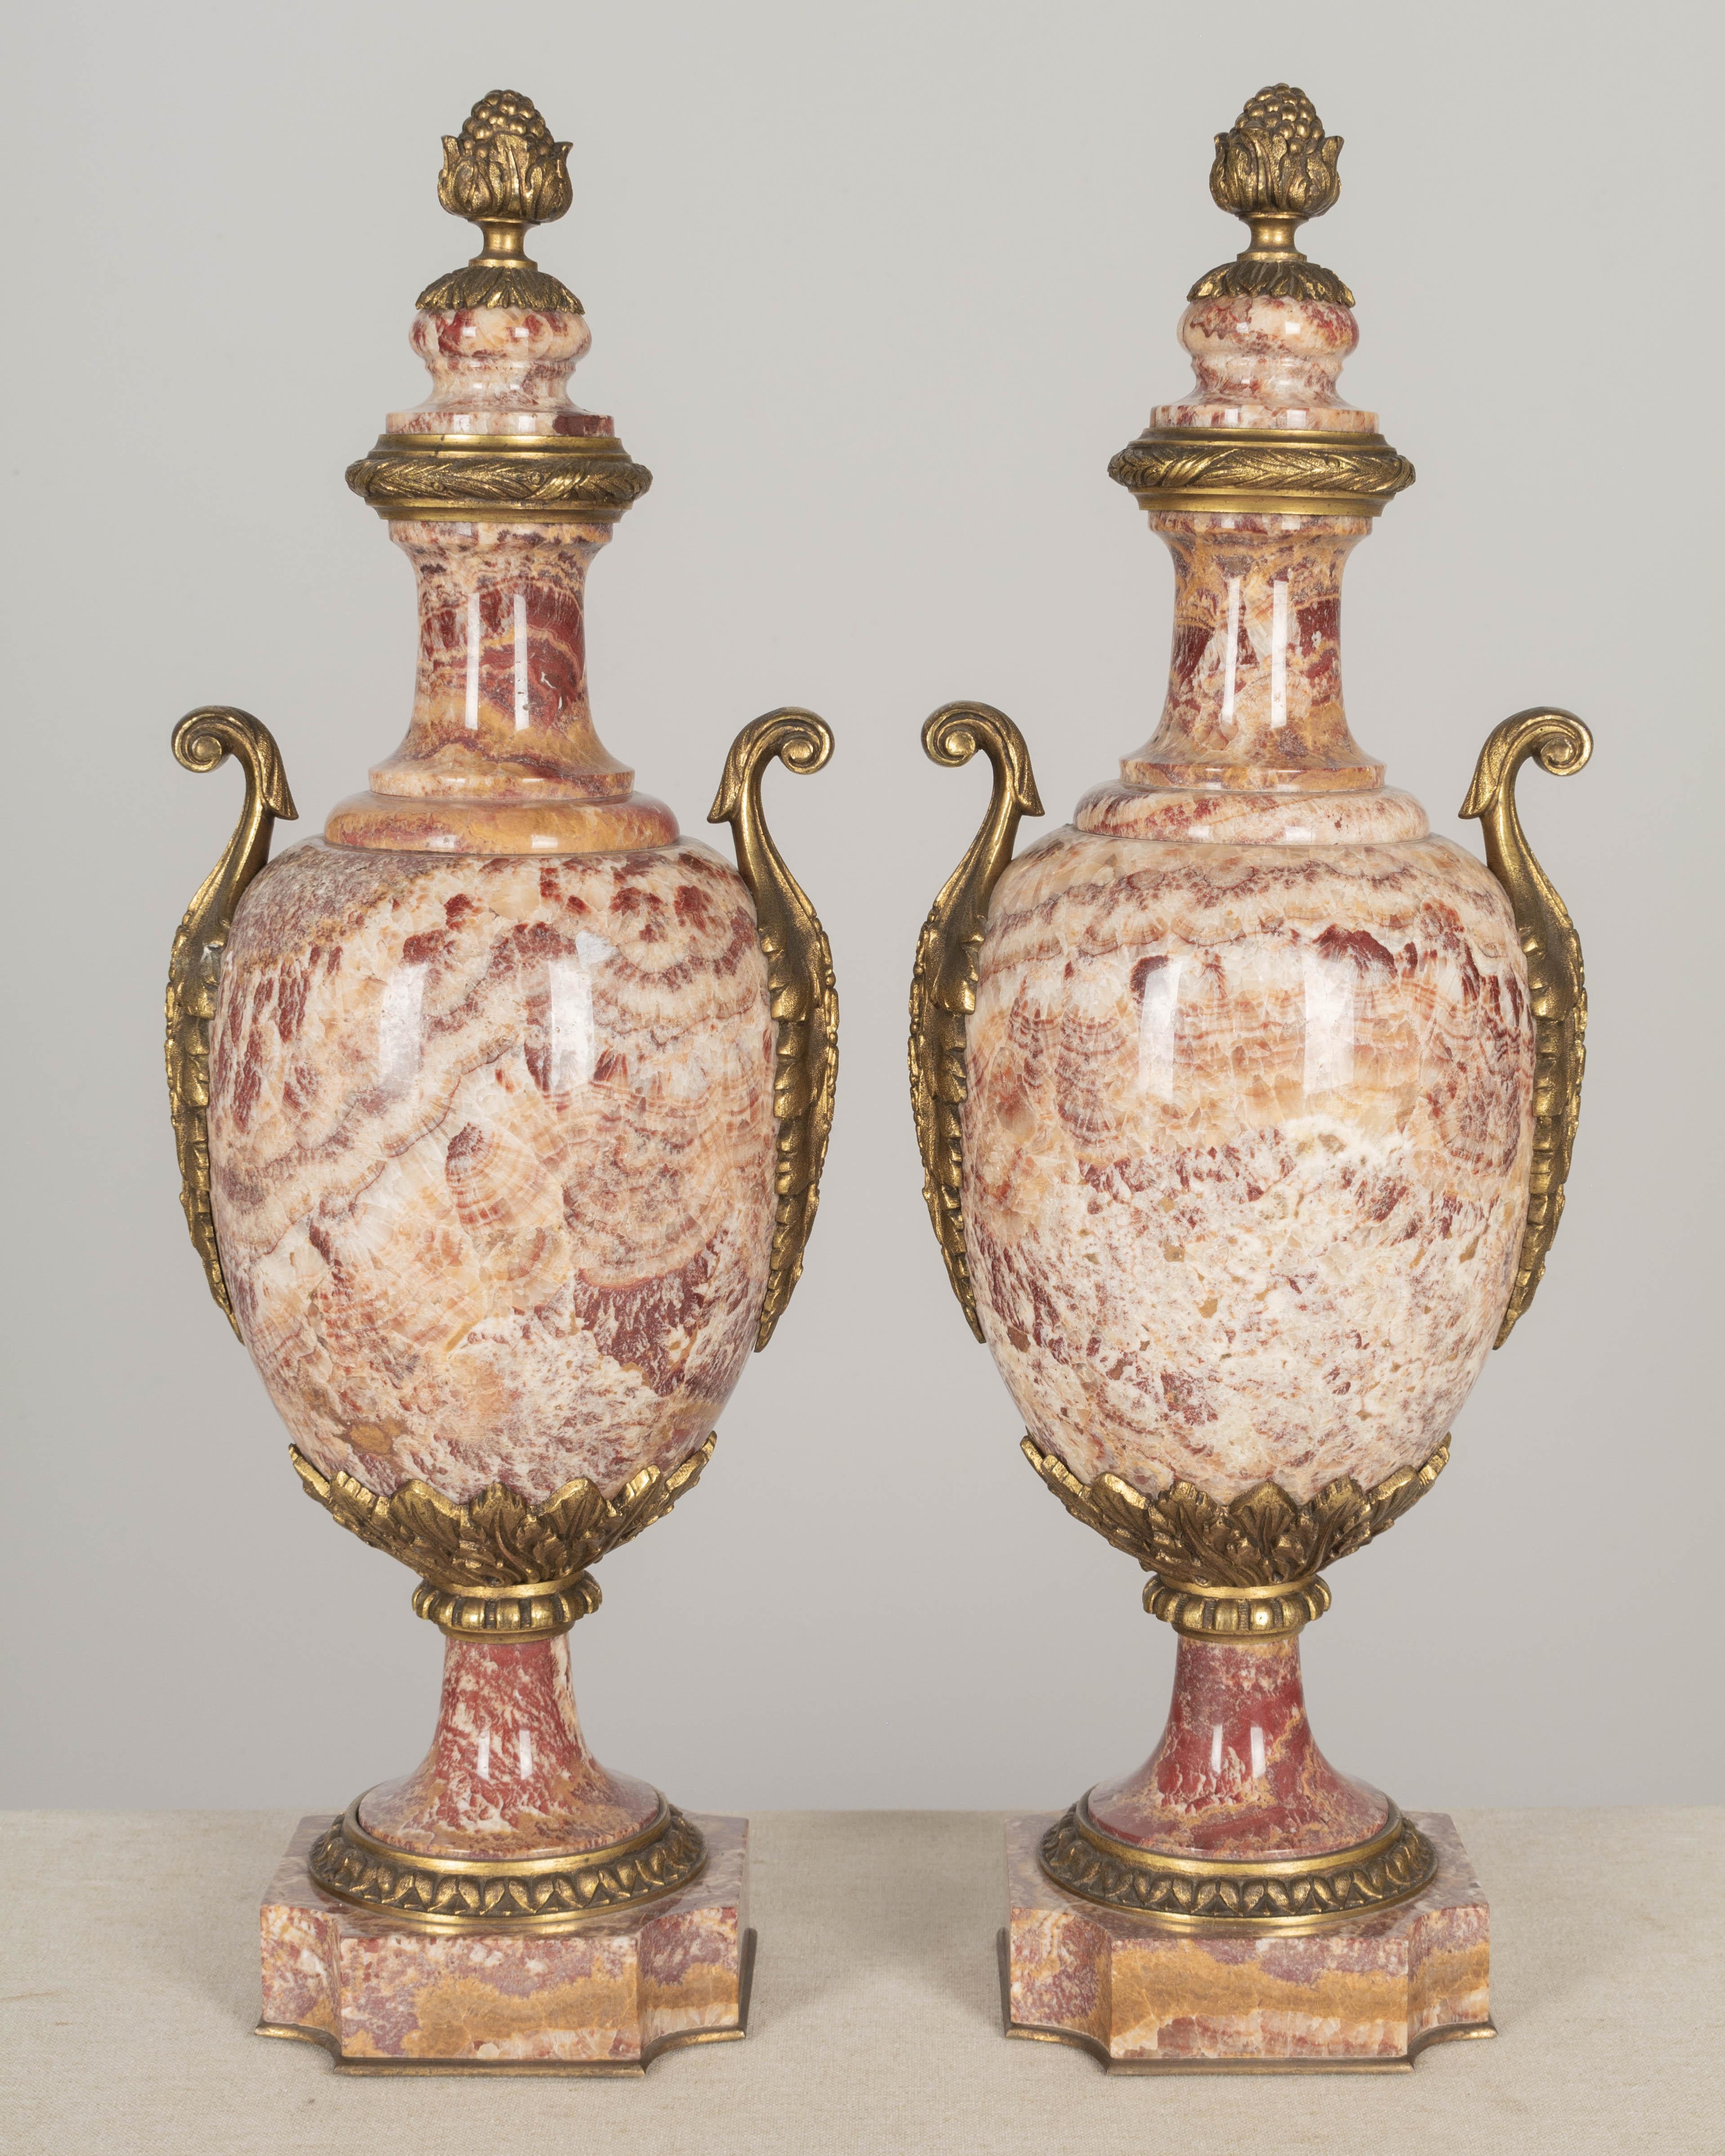 Cast 19th Century French Marble and Bronze Cassolette Urns Pair For Sale